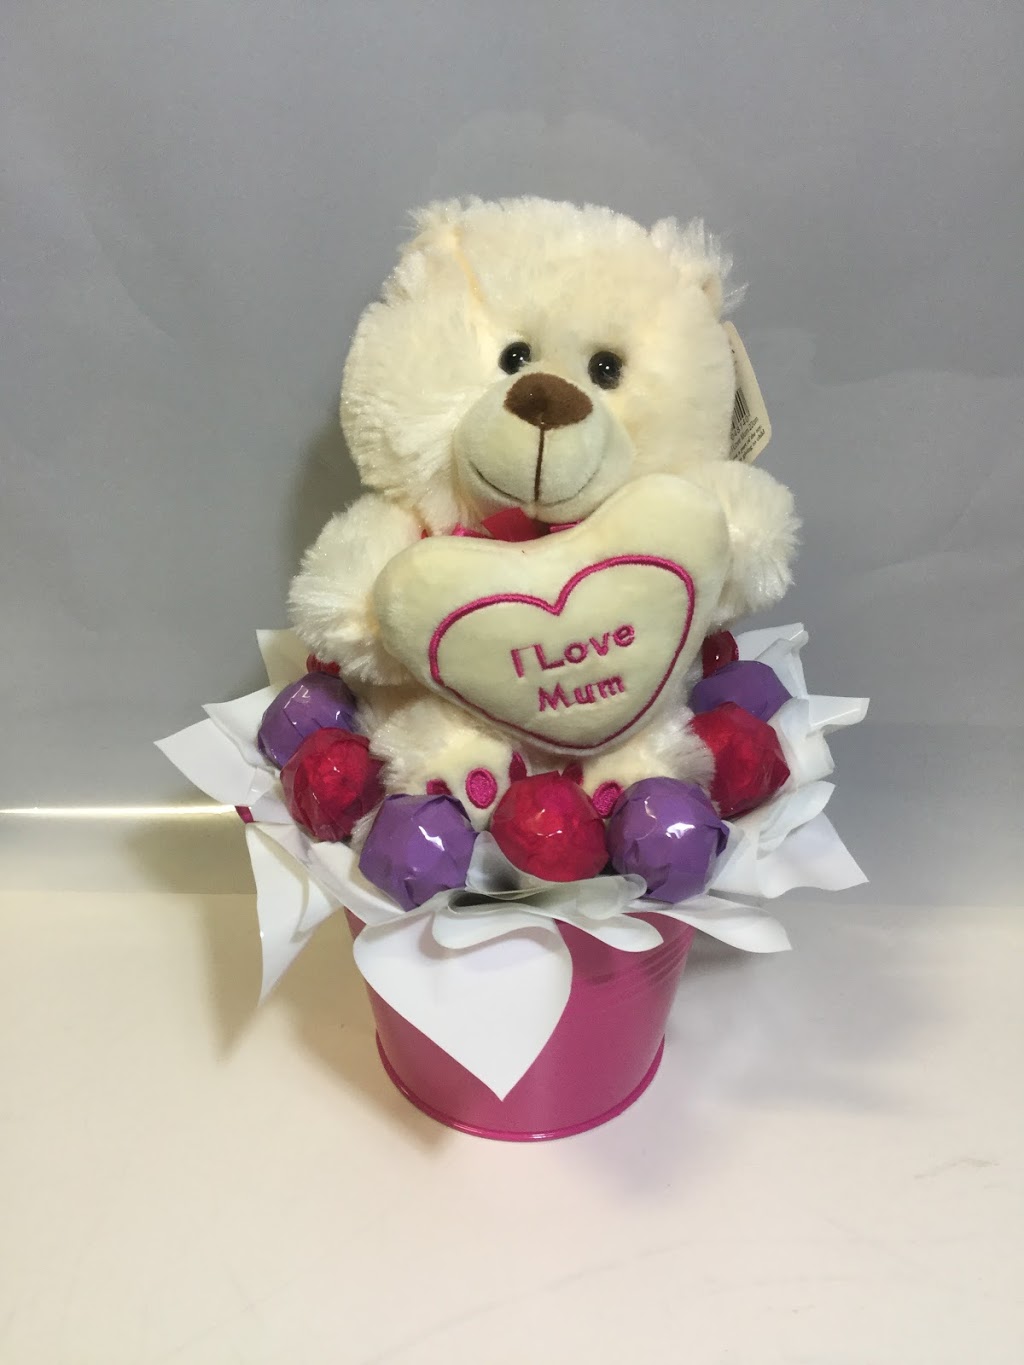 Choccy-licious Bouquets & Gifts | florist | 2 Picton Rd, East Bunbury WA 6230, Australia | 0418935640 OR +61 418 935 640